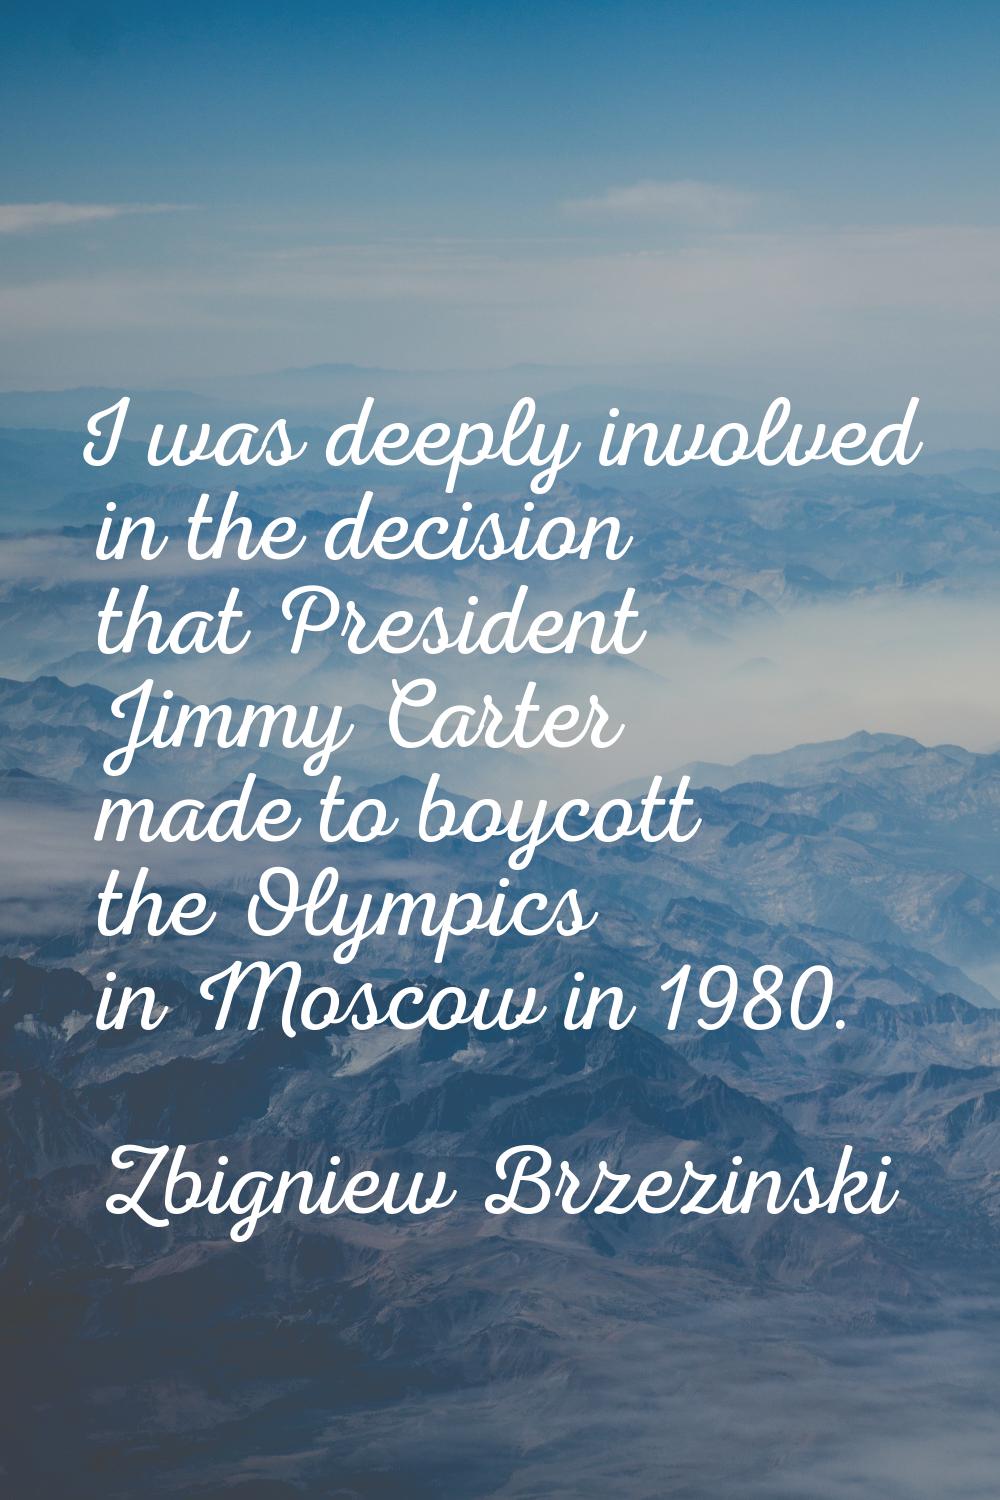 I was deeply involved in the decision that President Jimmy Carter made to boycott the Olympics in M